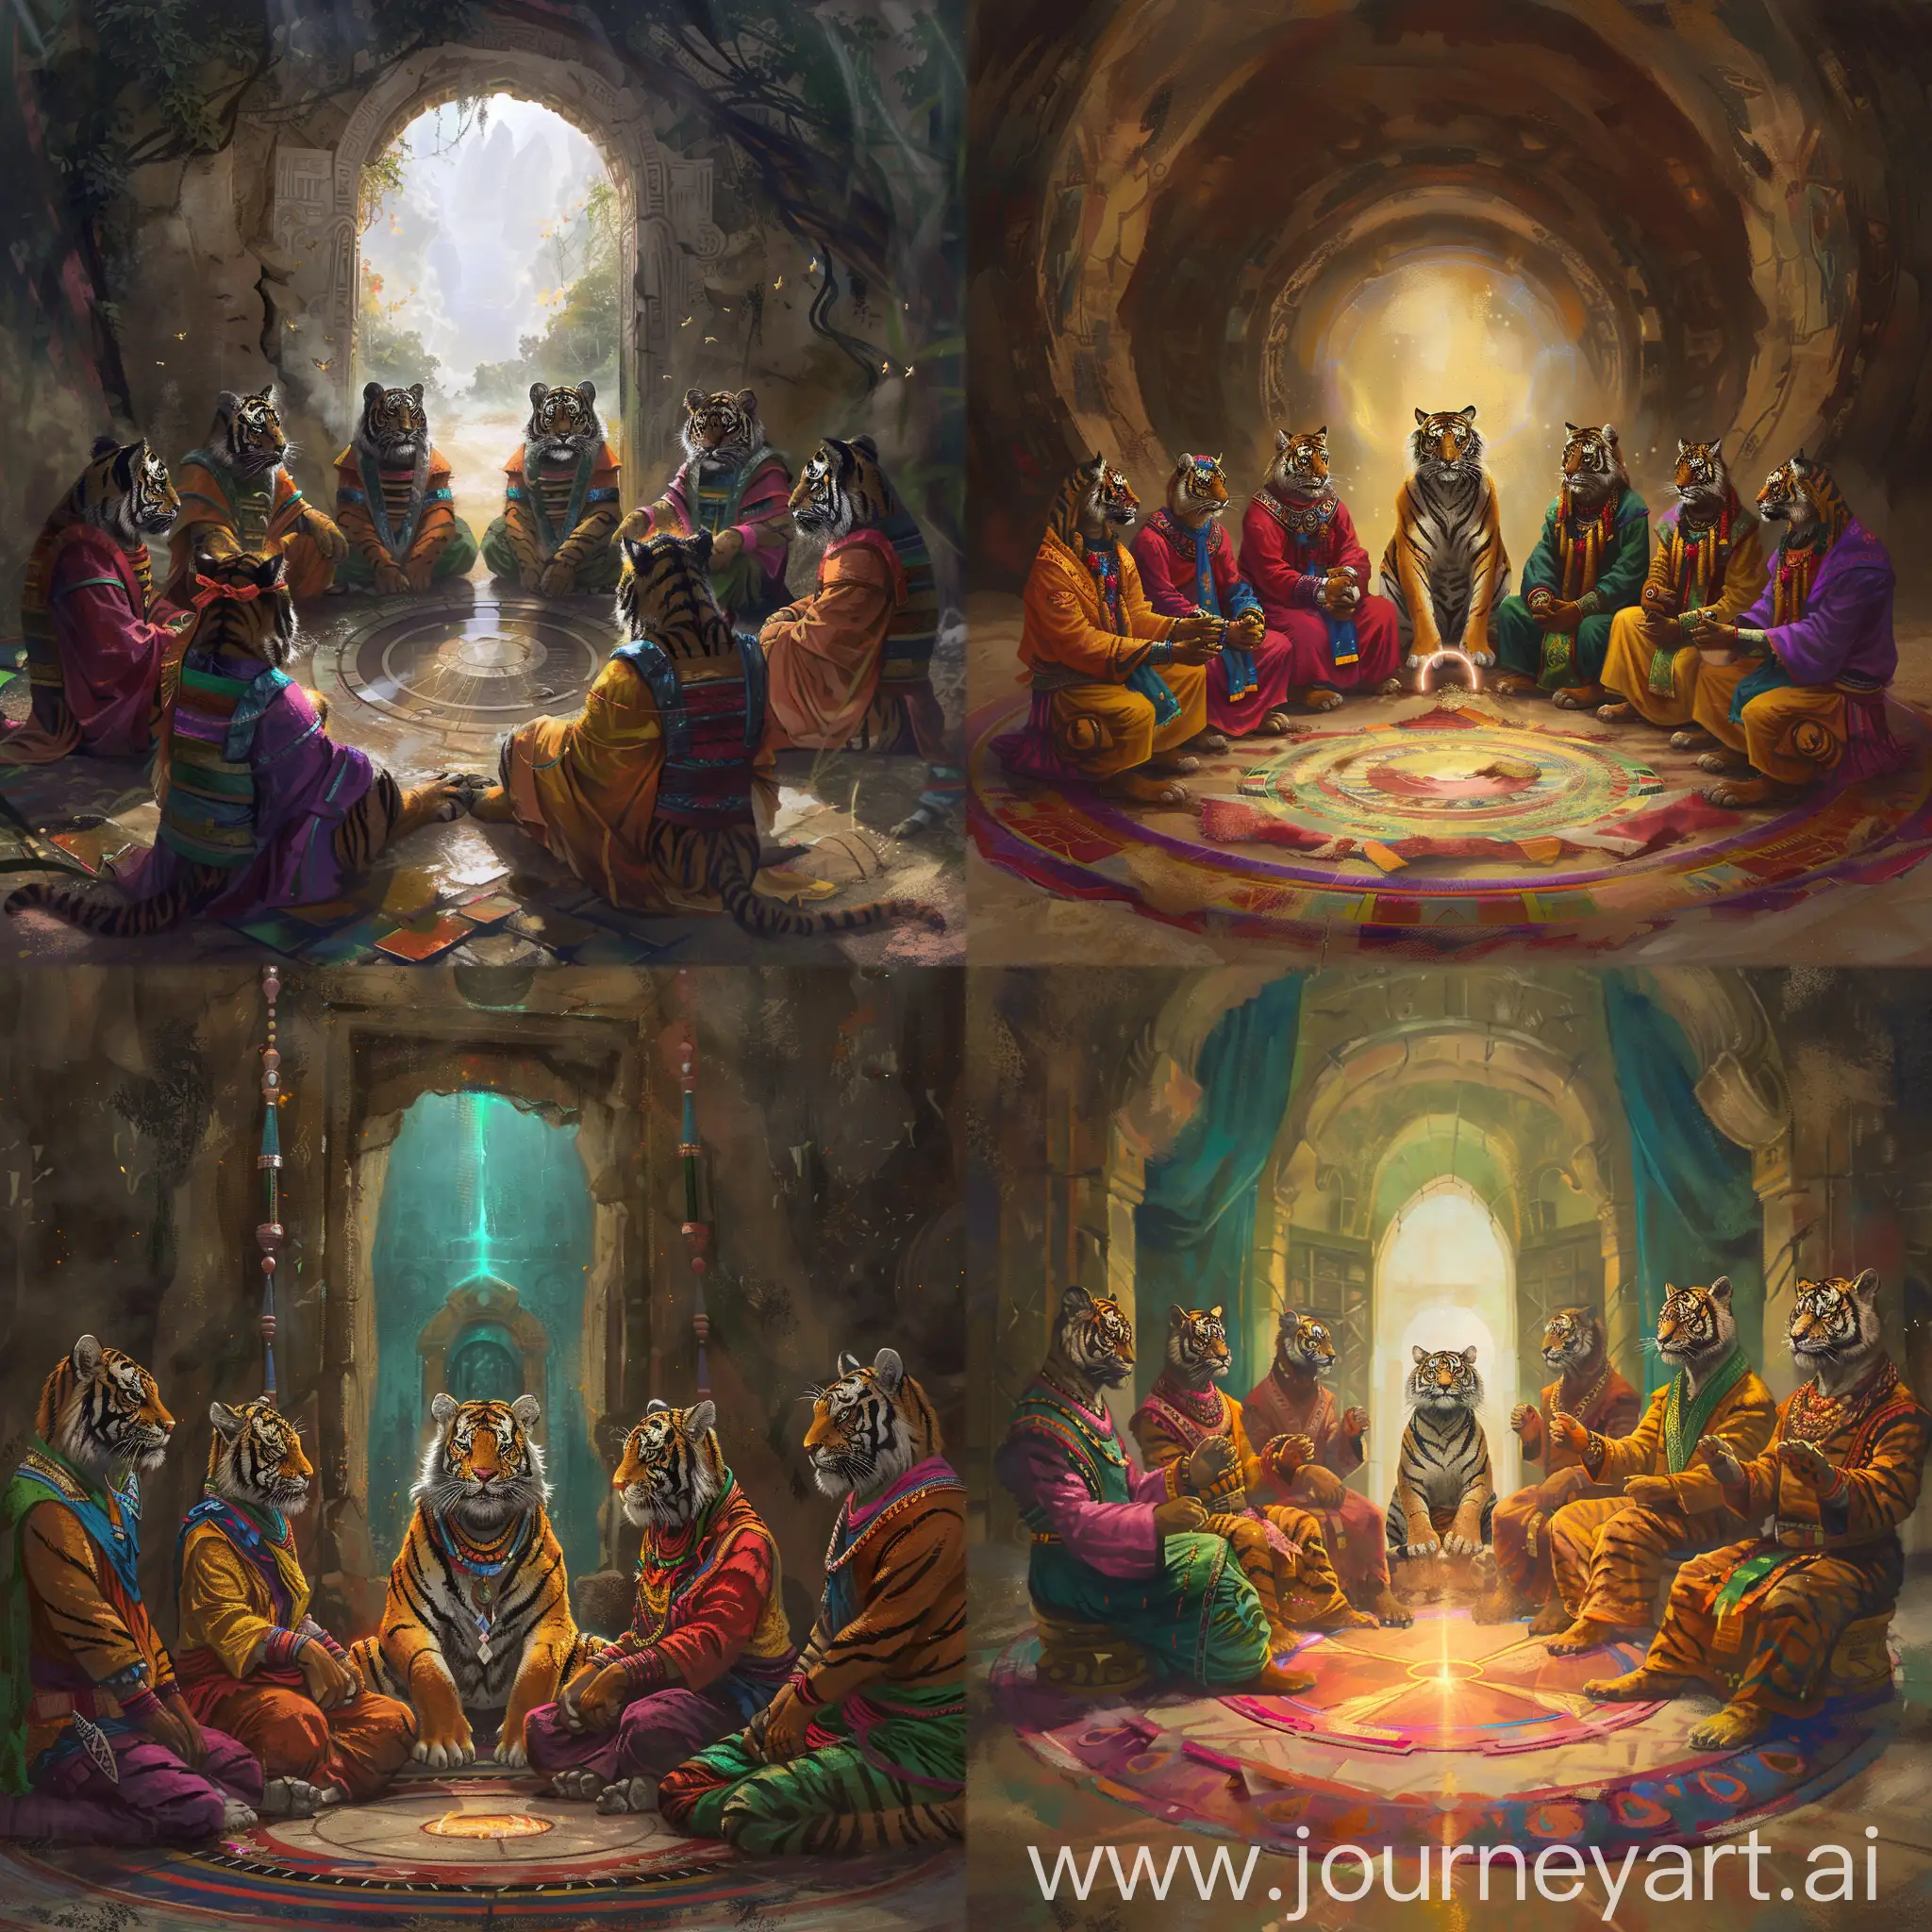 an ancient tiger tribe with colorful clothes sitting in a circle with a portal in the center